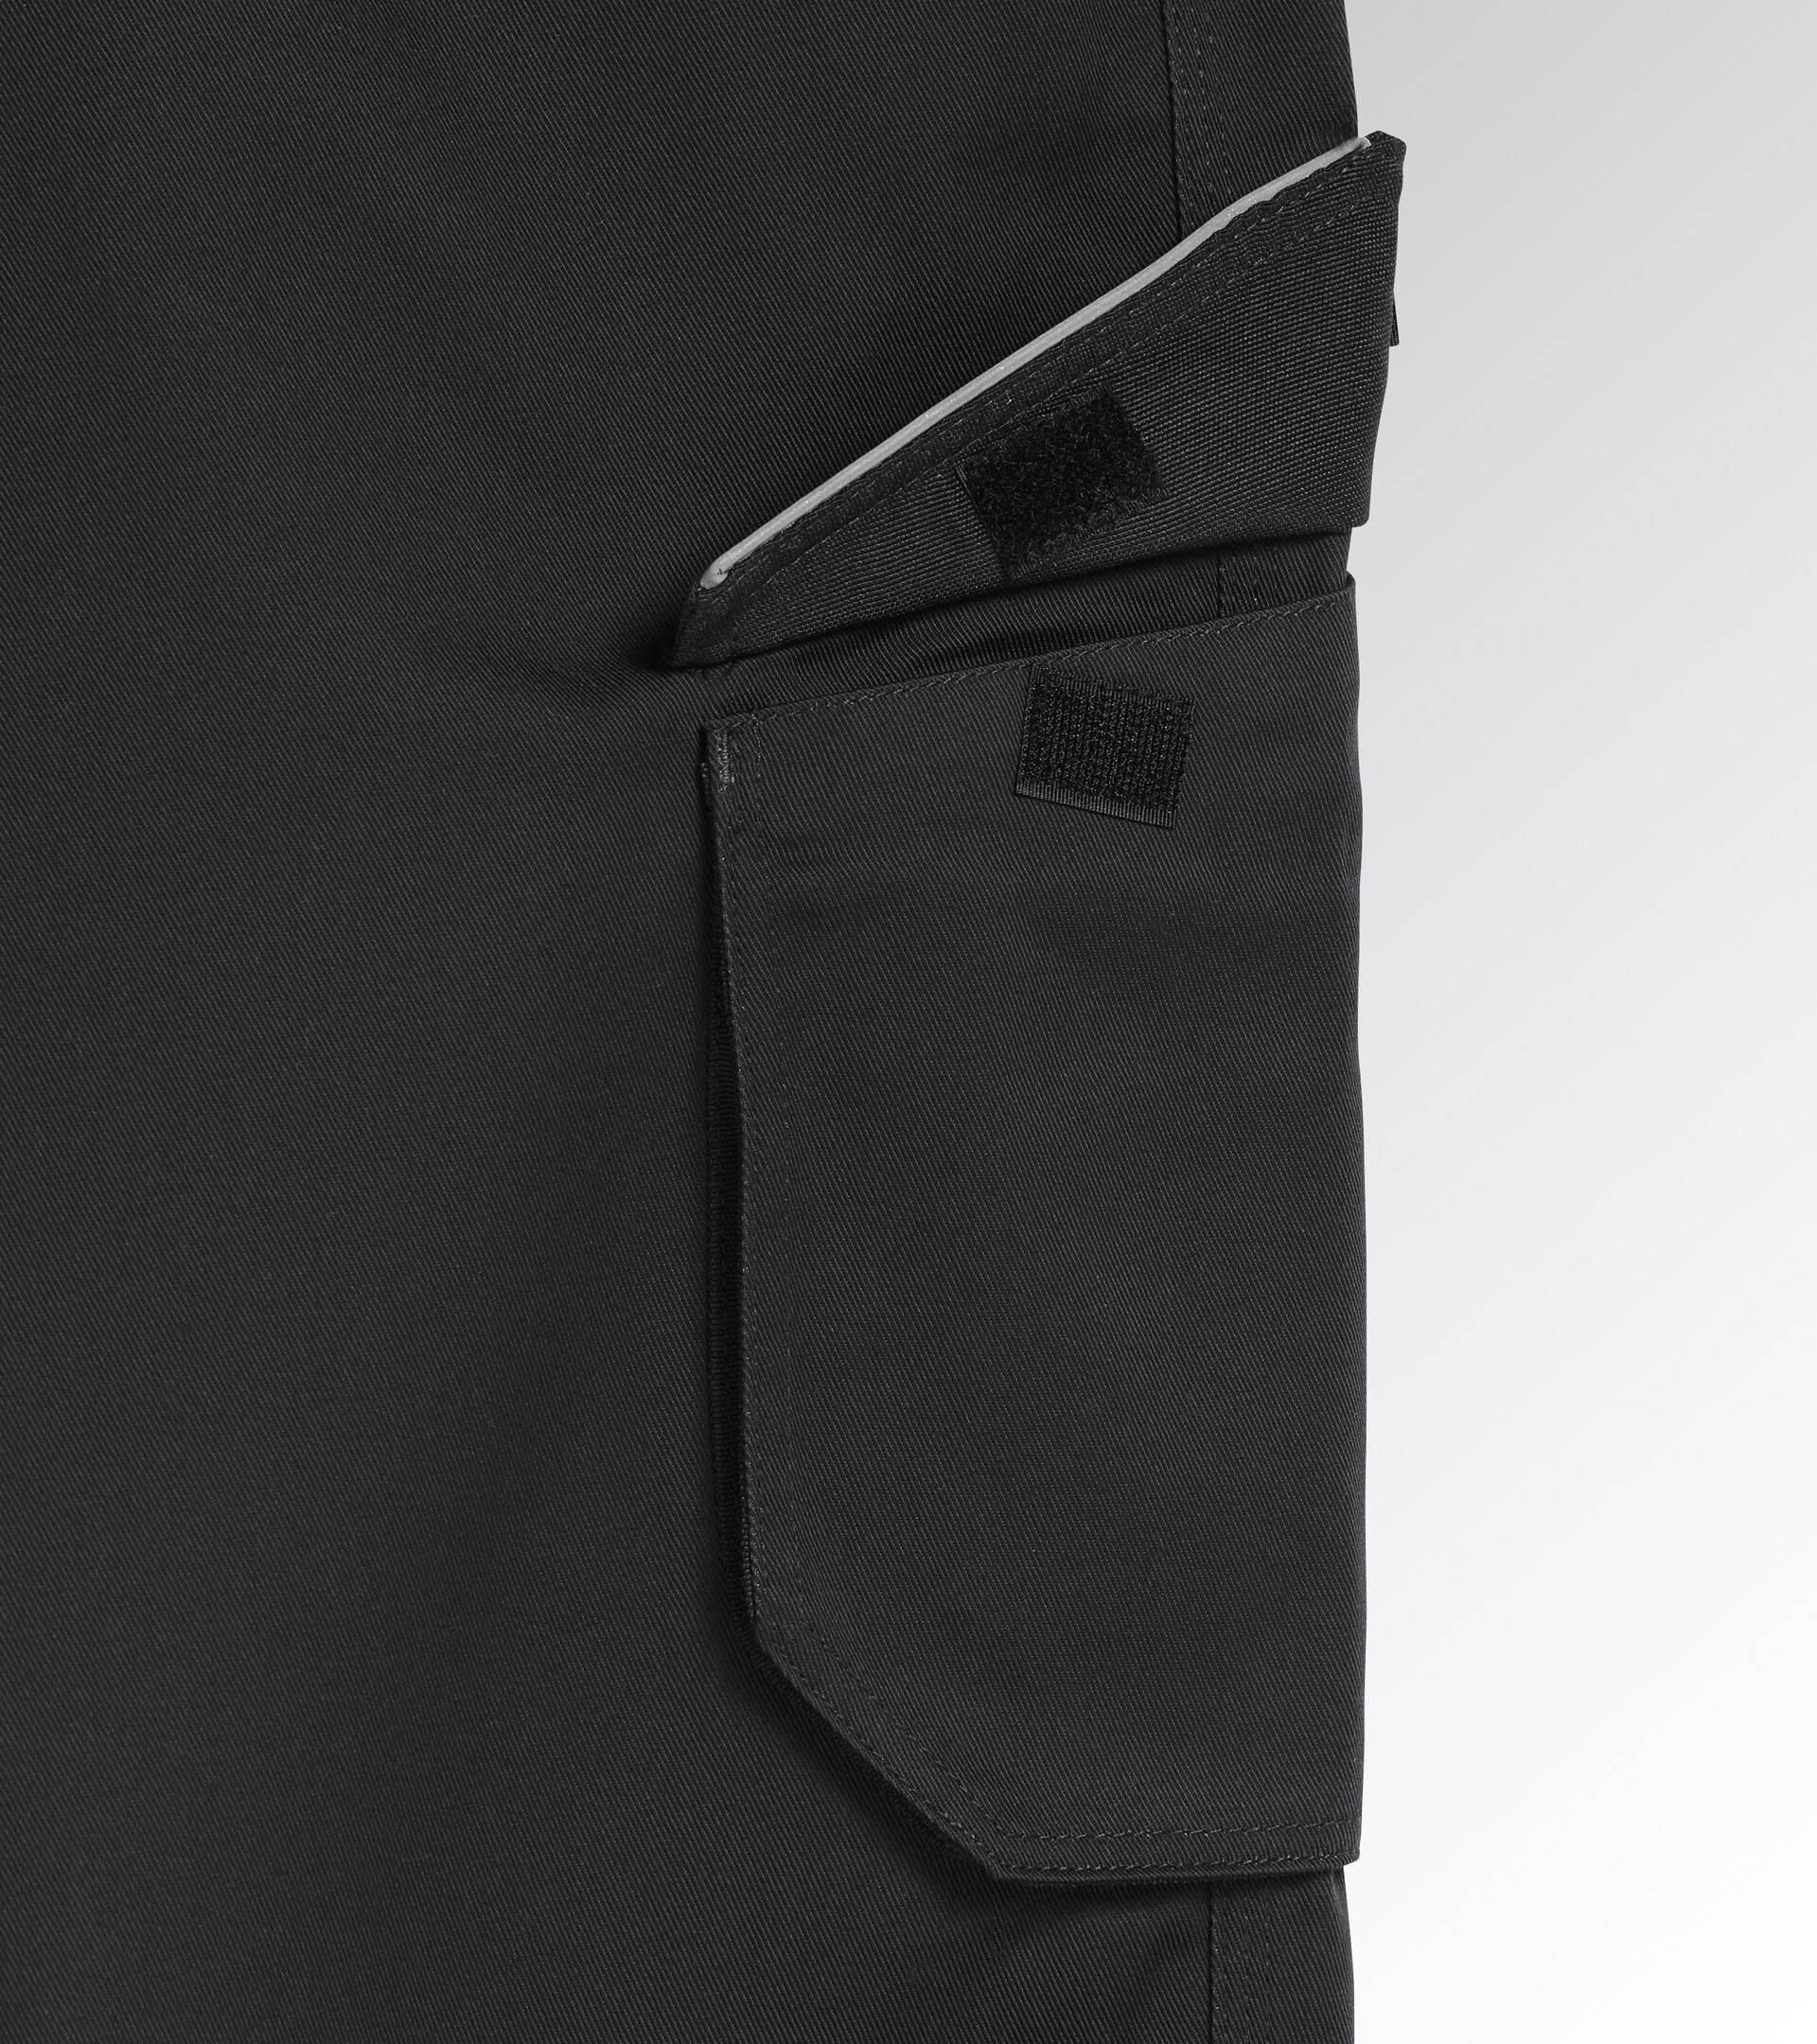 Work trousers PANT STAFF WINTER CARGO BLACK - Utility